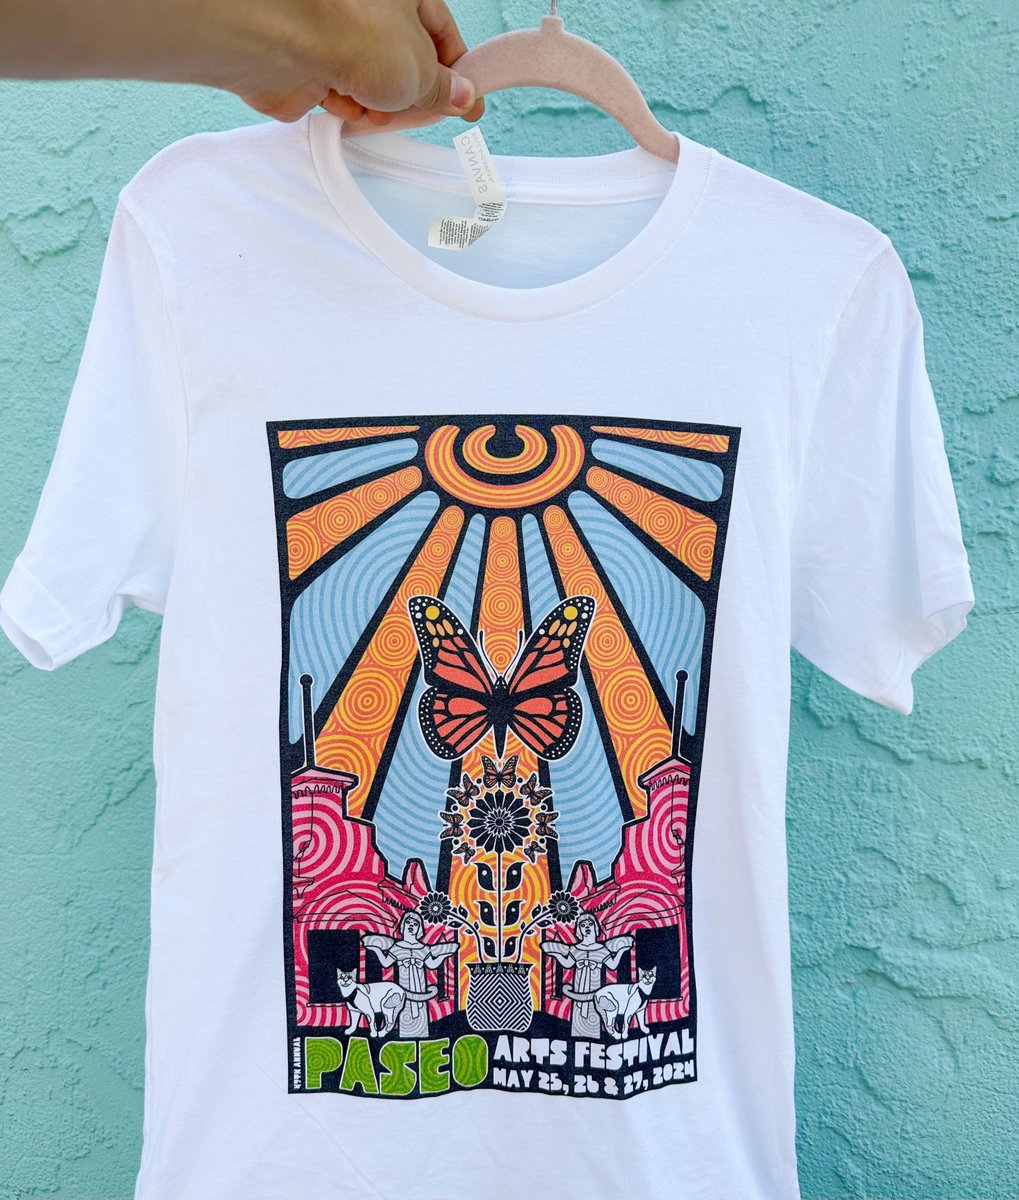 The 47th Annual Paseo Arts Festival is nearly ONE WEEK AWAY! To help get you hyped, our new t-shirts are on sale right now! They are $22 for sizes S-XL, $24 for 2XL and up and $20 for tank tops. Pick your's up today at the Paseo Arts and Creativity Center, 3024 Paseo!